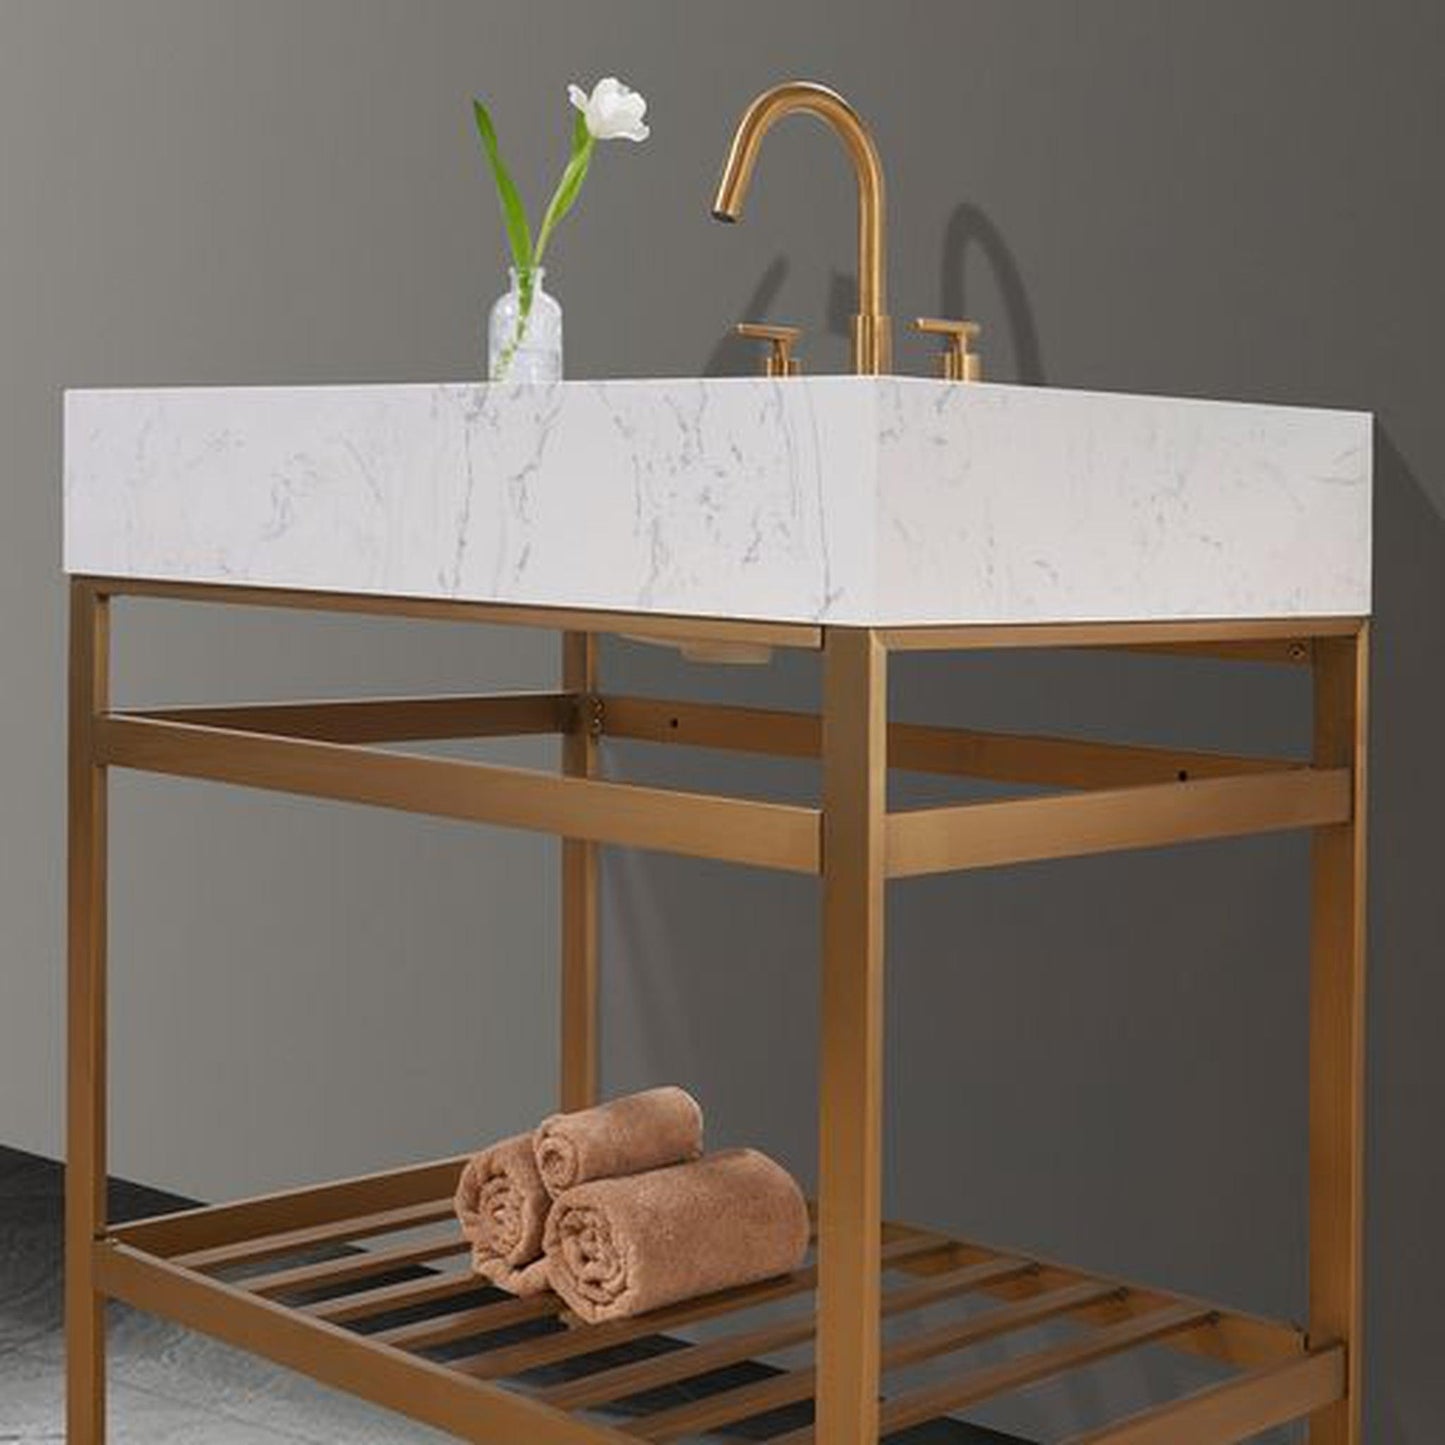 Altair Merano 36" Brushed Gold Single Stainless Steel Bathroom Vanity Set Console With Aosta White Stone Top, Single Rectangular Undermount Ceramic Sink, and Safety Overflow Hole